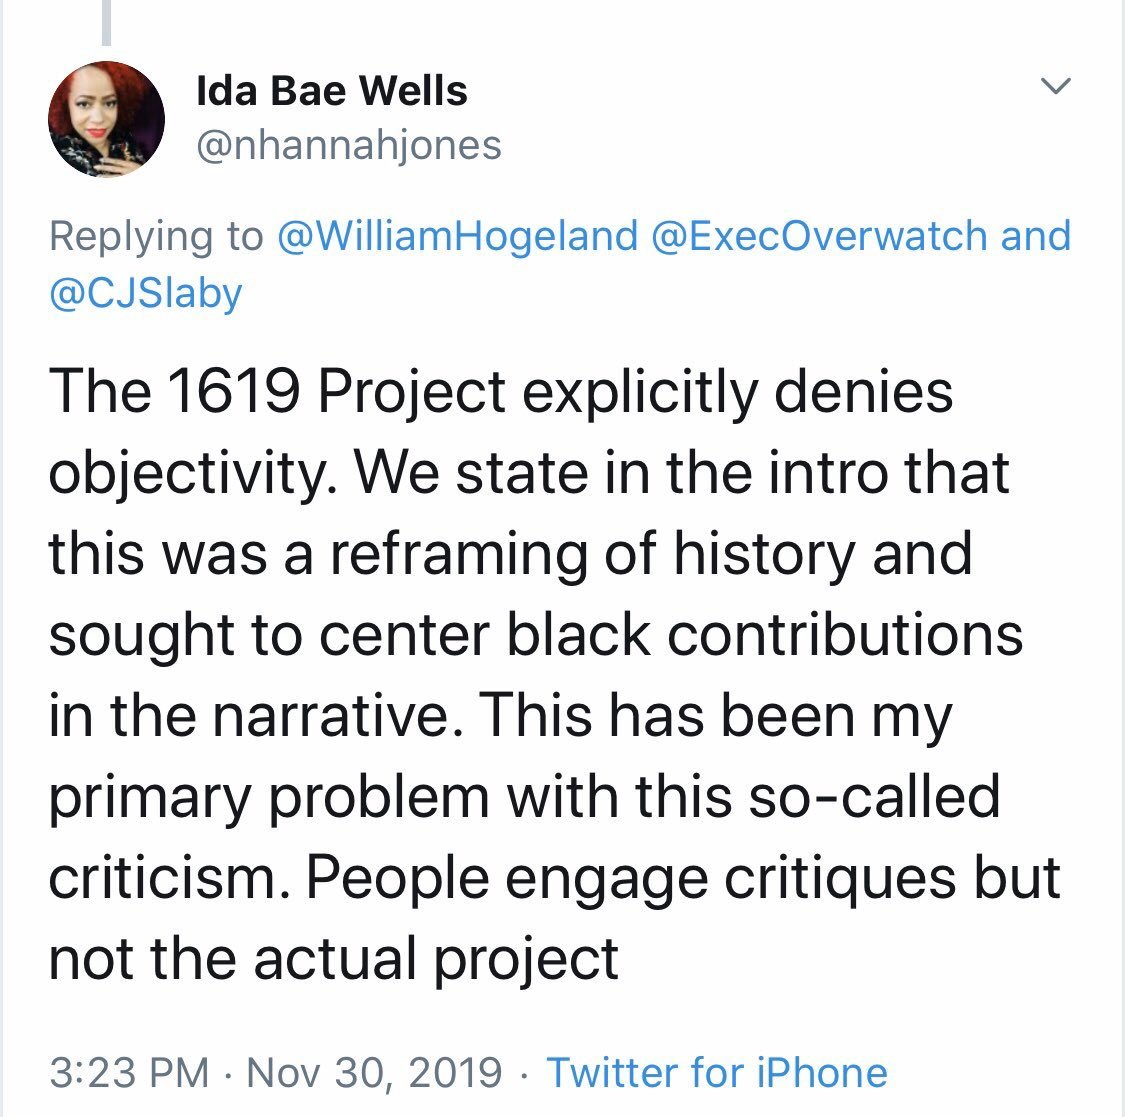 NHJ also has basically admitted her project was agenda-pushing propaganda that "explicitly denies objectivity." If objectivity isn't real, then who cares if your facts are inaccurate? Quite the solve!